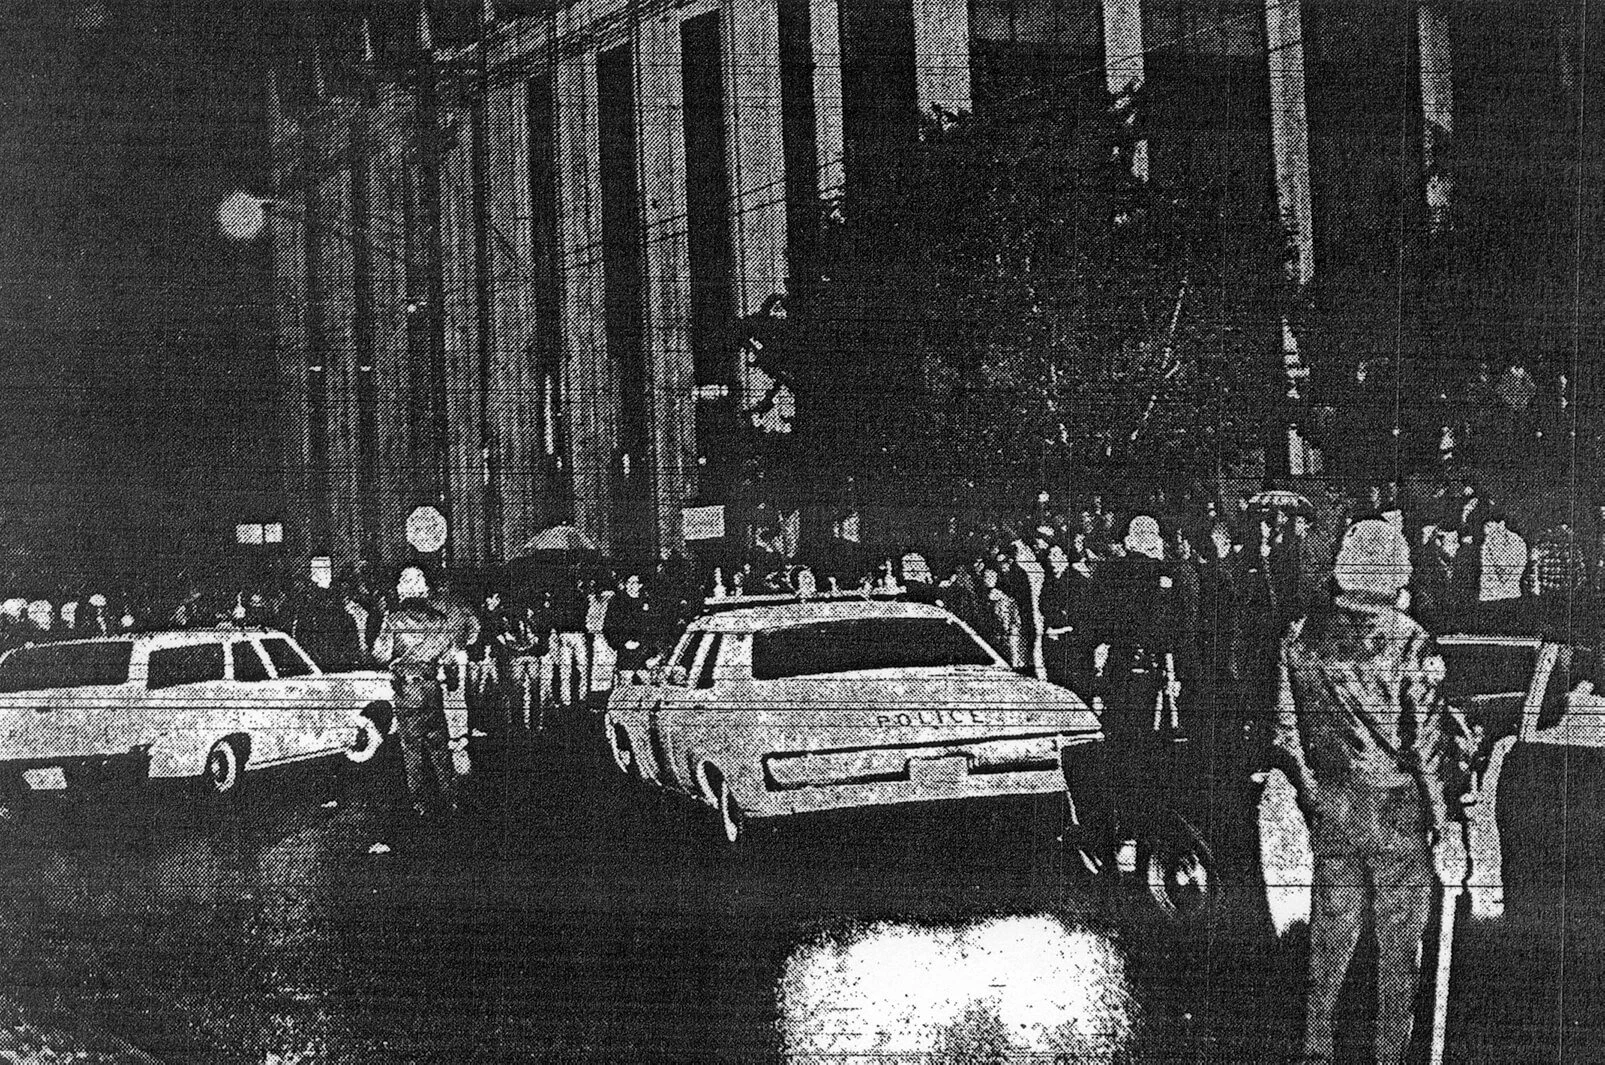 A police car and police man are seen in the foreground, and in the background are dozens of students. It is night time.